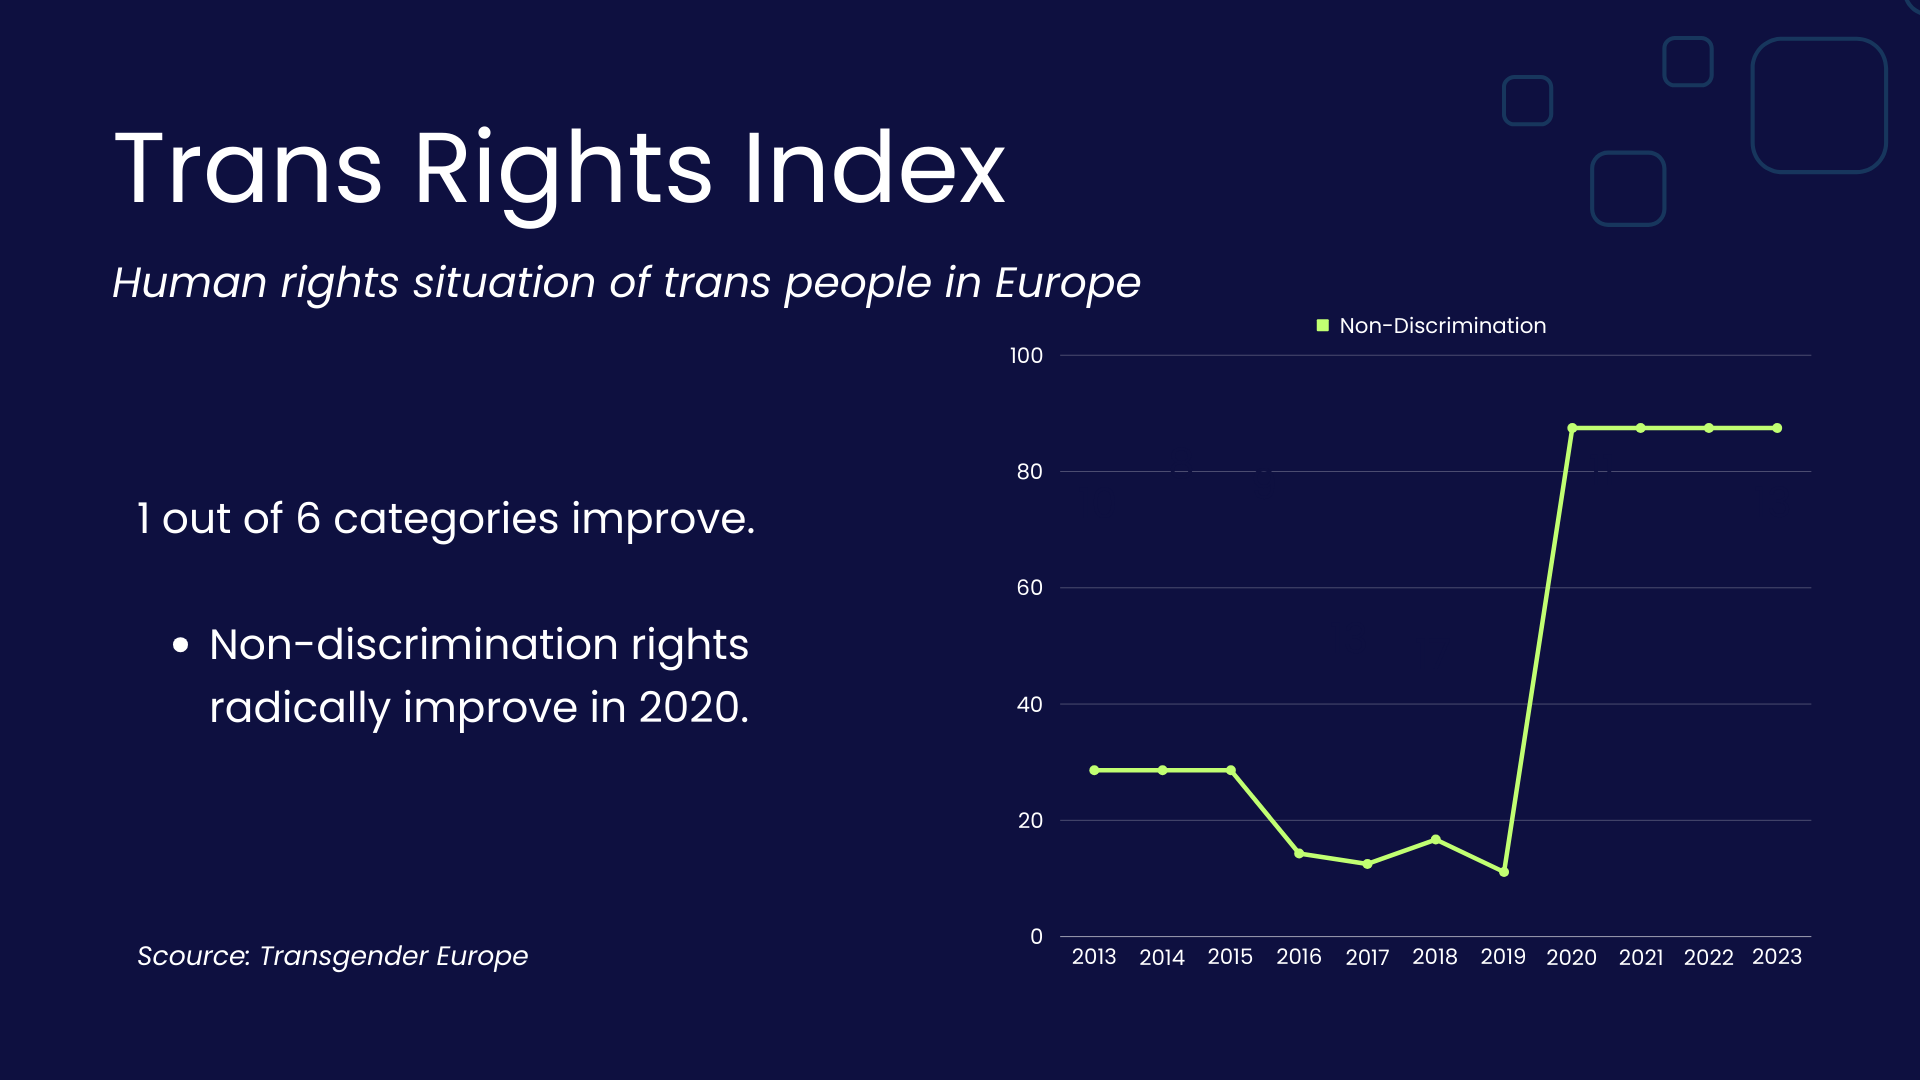 Trans rights index: Human rights situation of trans people in Europe. 1 out of 6 categories improve: Non-discrimination rights radically improve in 2020. (Source: Transgender Europe)